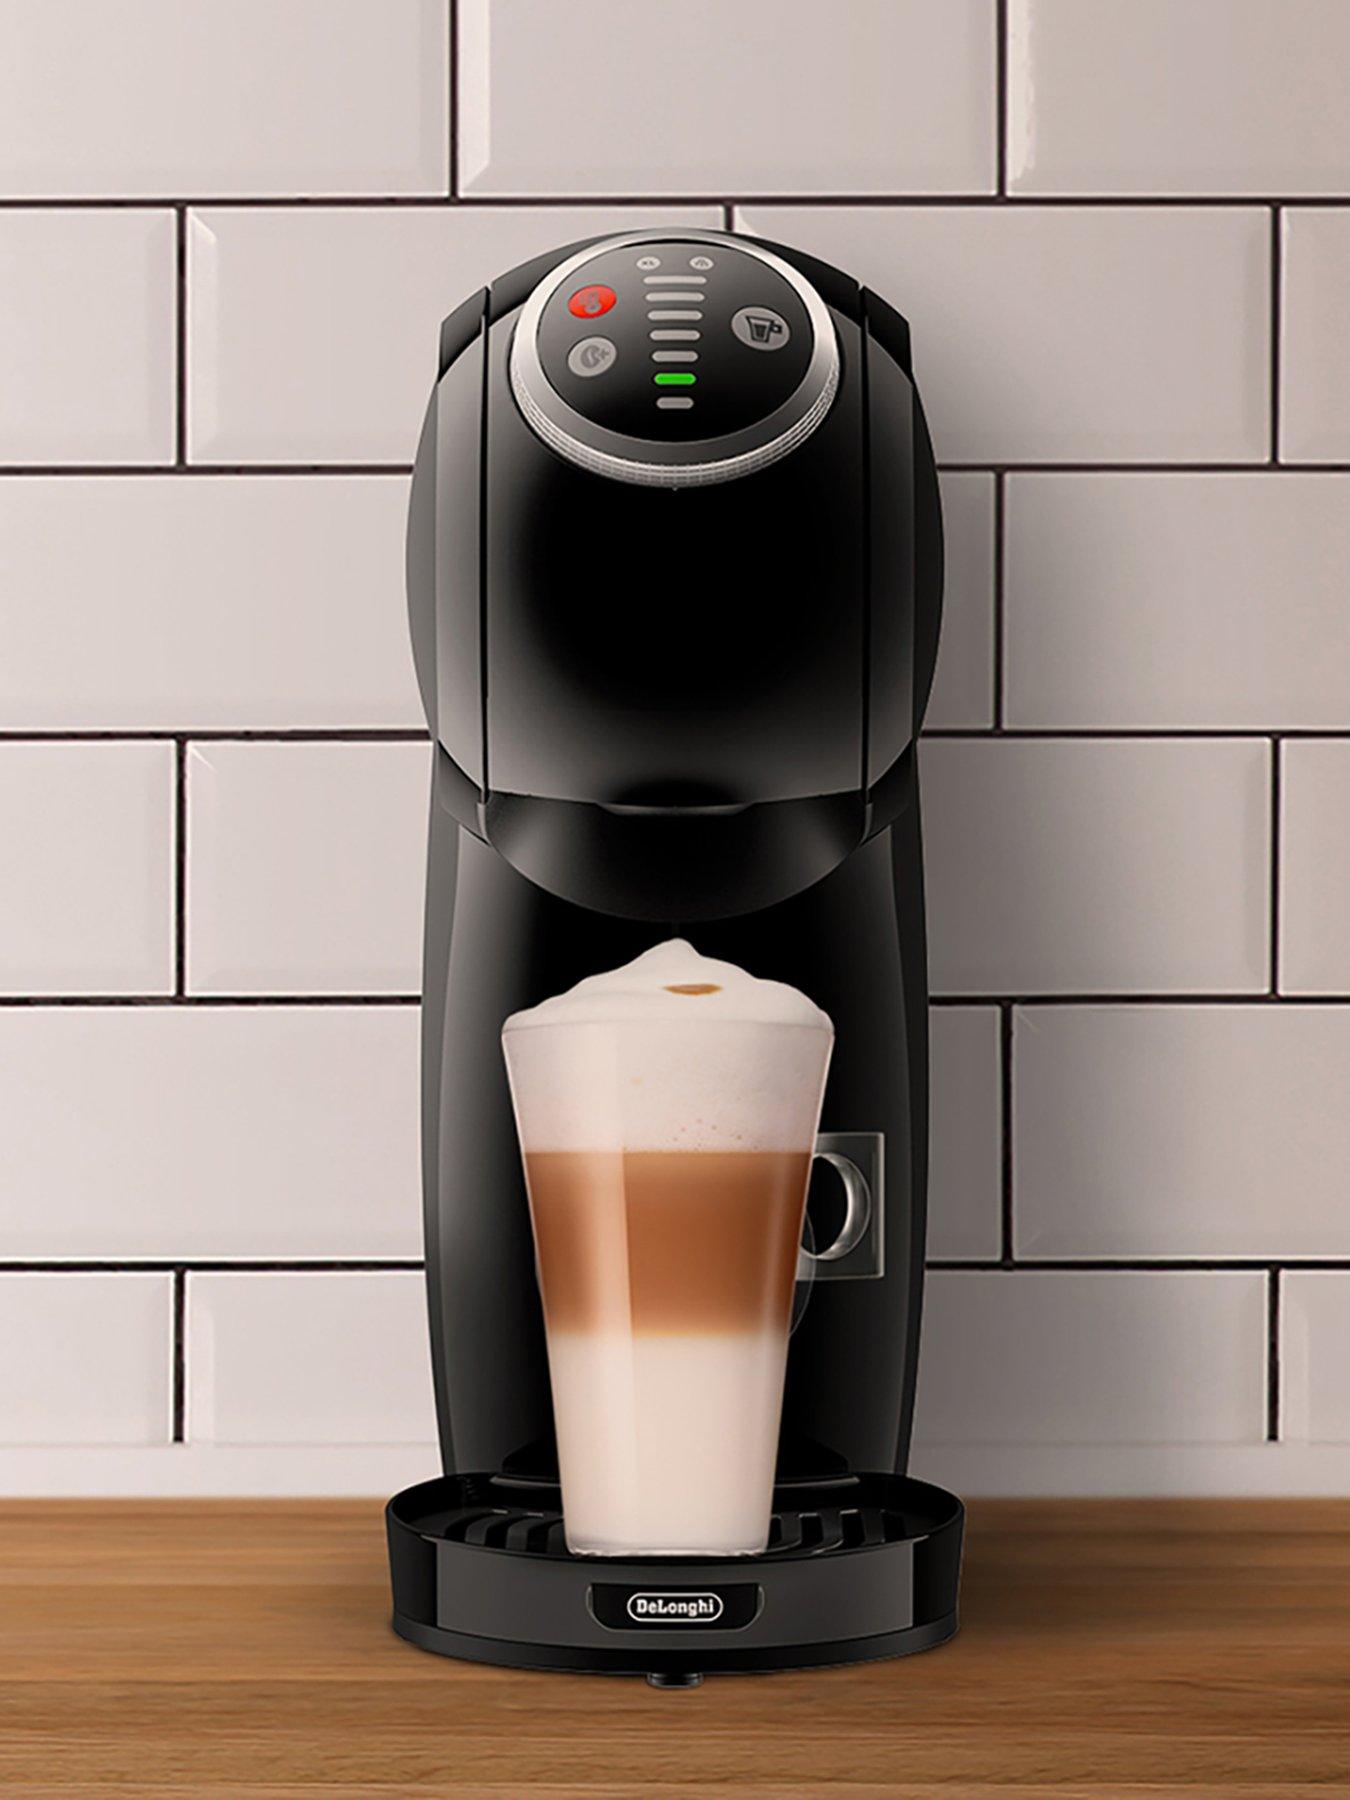 How to Use the NESCAFE Dolce Gusto GENIO S PLUS Coffee Machine